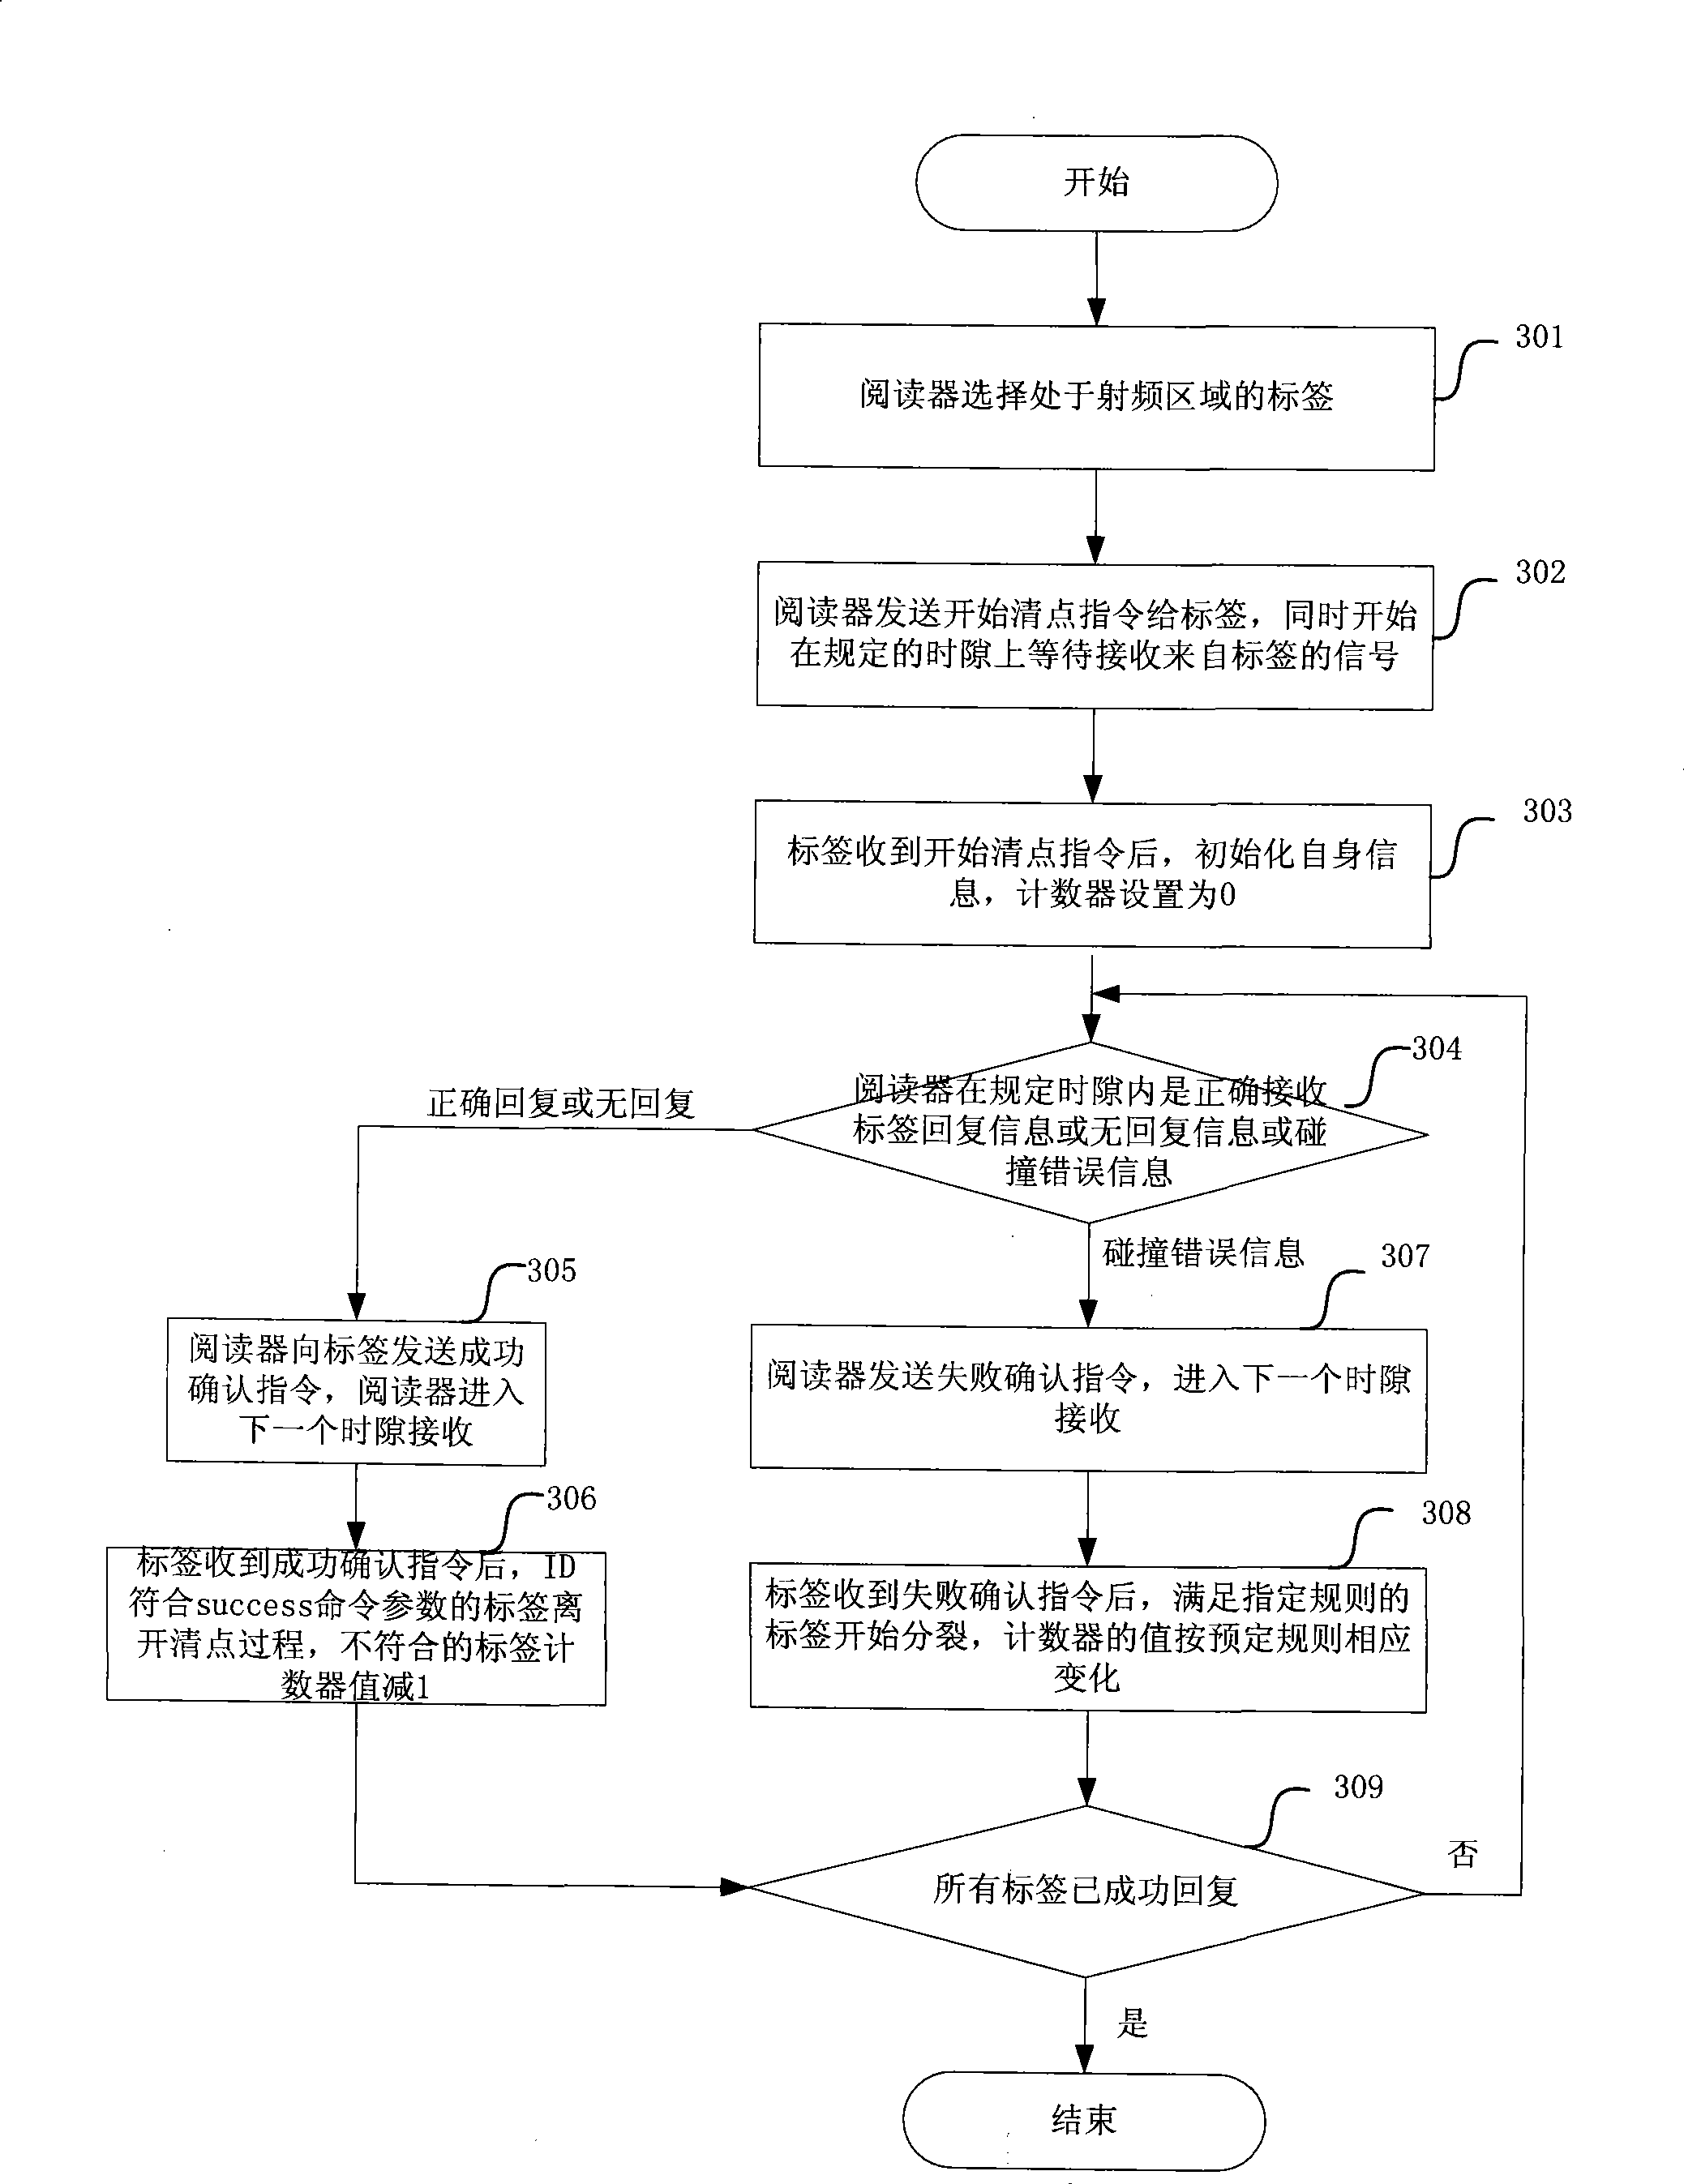 Label anti-collision method for radio frequency recognition system